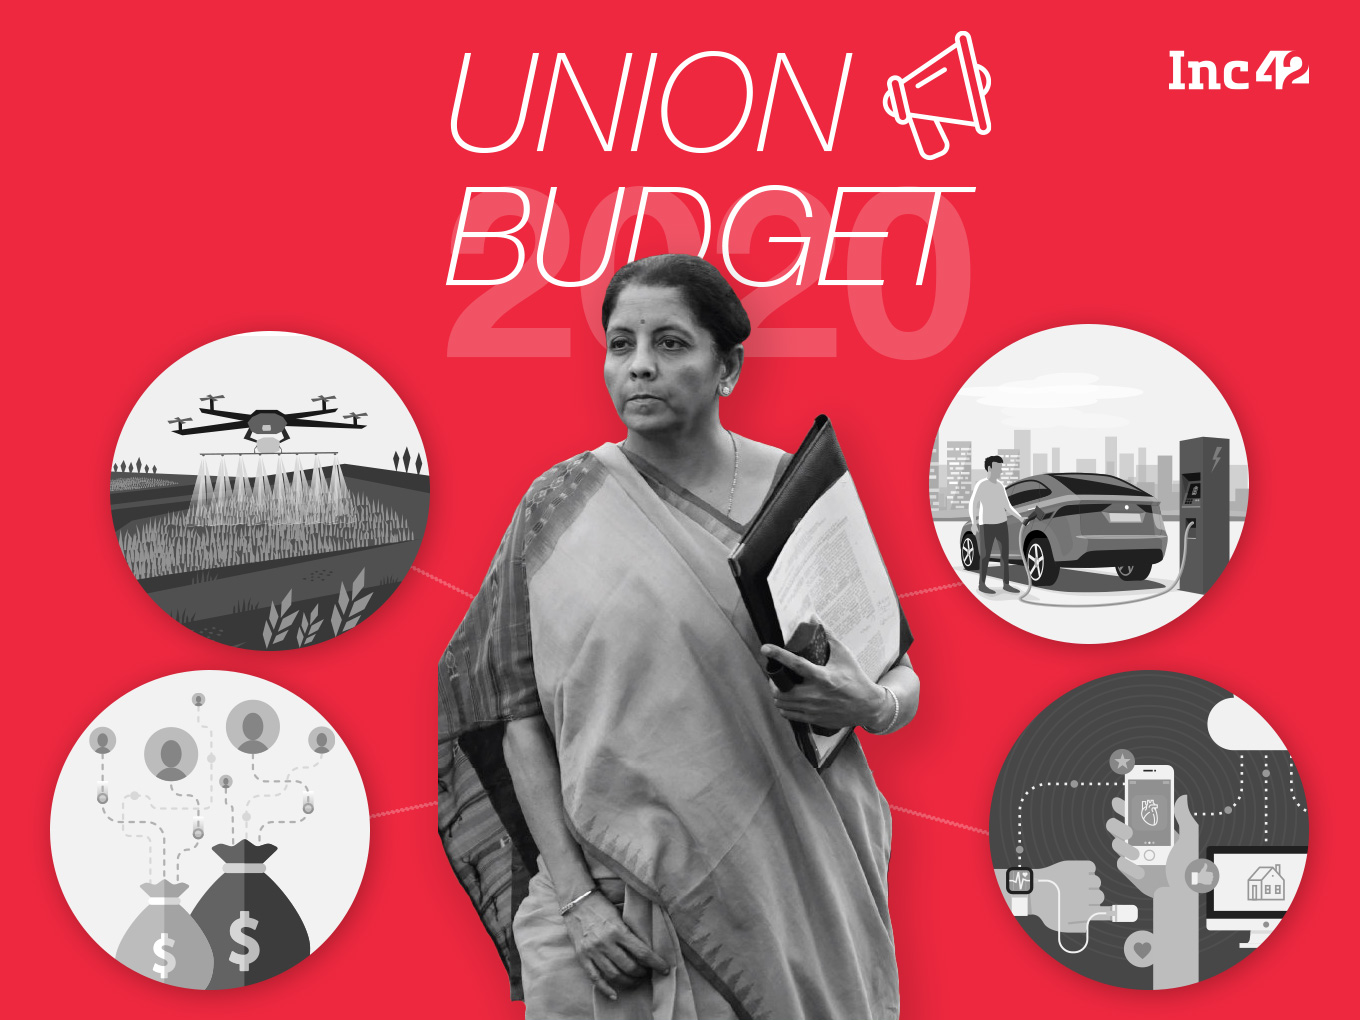 Union Budget 2020: Top 11 Demands From India's Startups, Investors